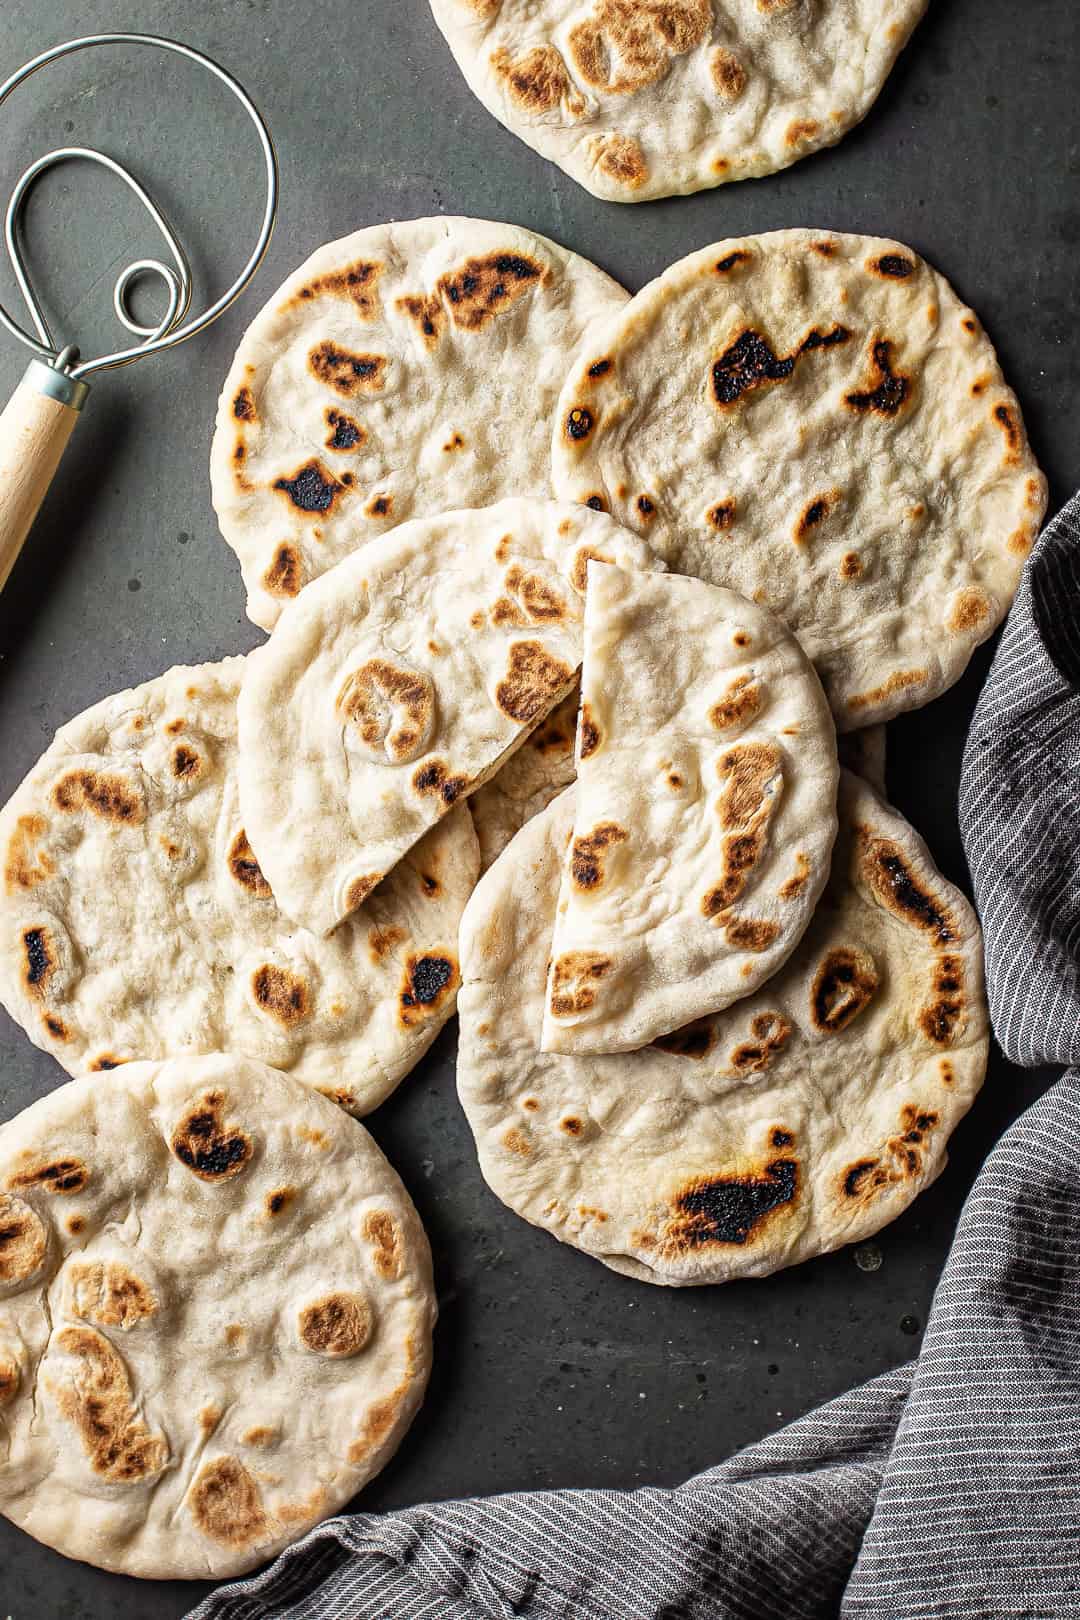 Pita bread recipe, prepared and cooked and displayed on a dark background with a striped kitchen cloth.